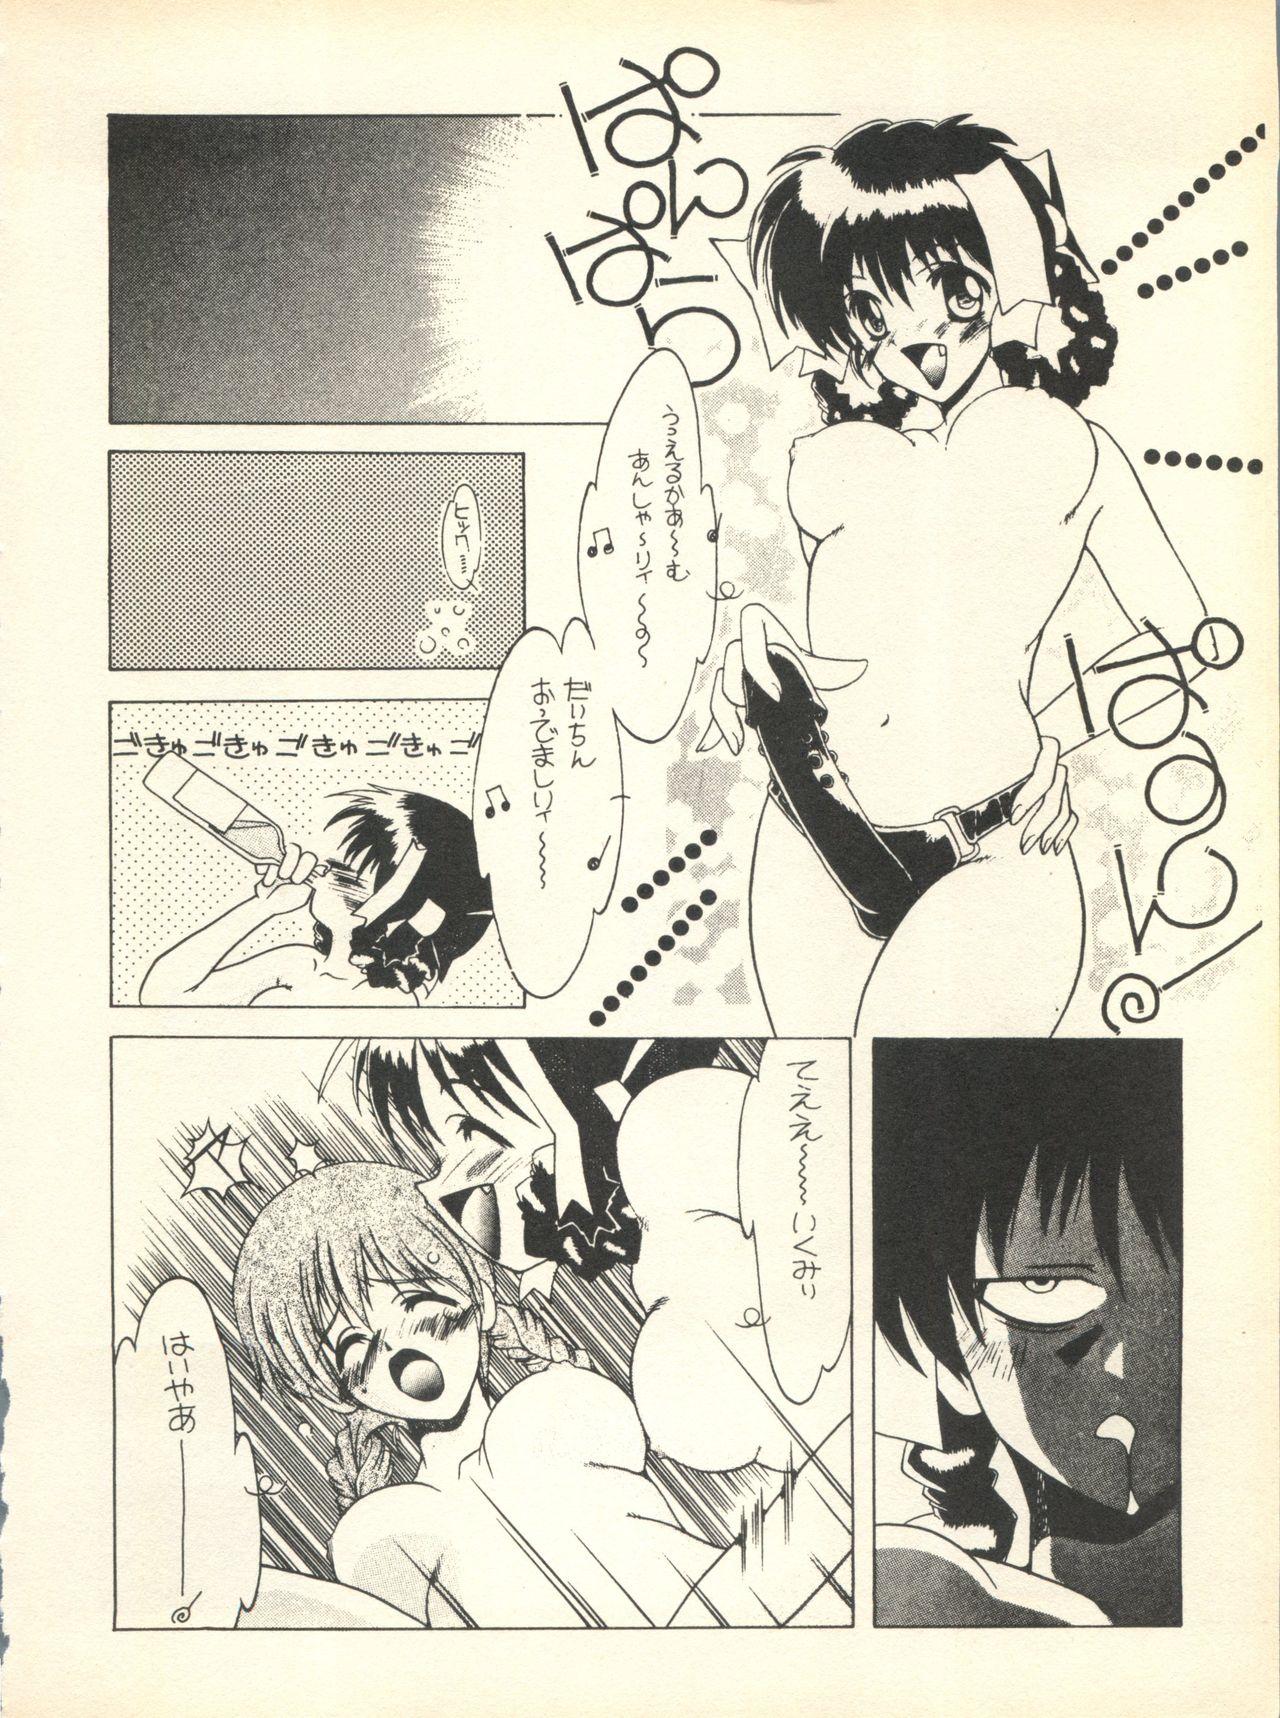 Asians [Studio Wallaby] SECRET FILE 001 Documents + [Paradise City] Rakuen Toshi 9 + [Dokanya, Tail of Nearly] DOKAN-02 + [Black Angel] Maru. - Street fighter To heart Anne of green gables Stepsiblings - Page 9